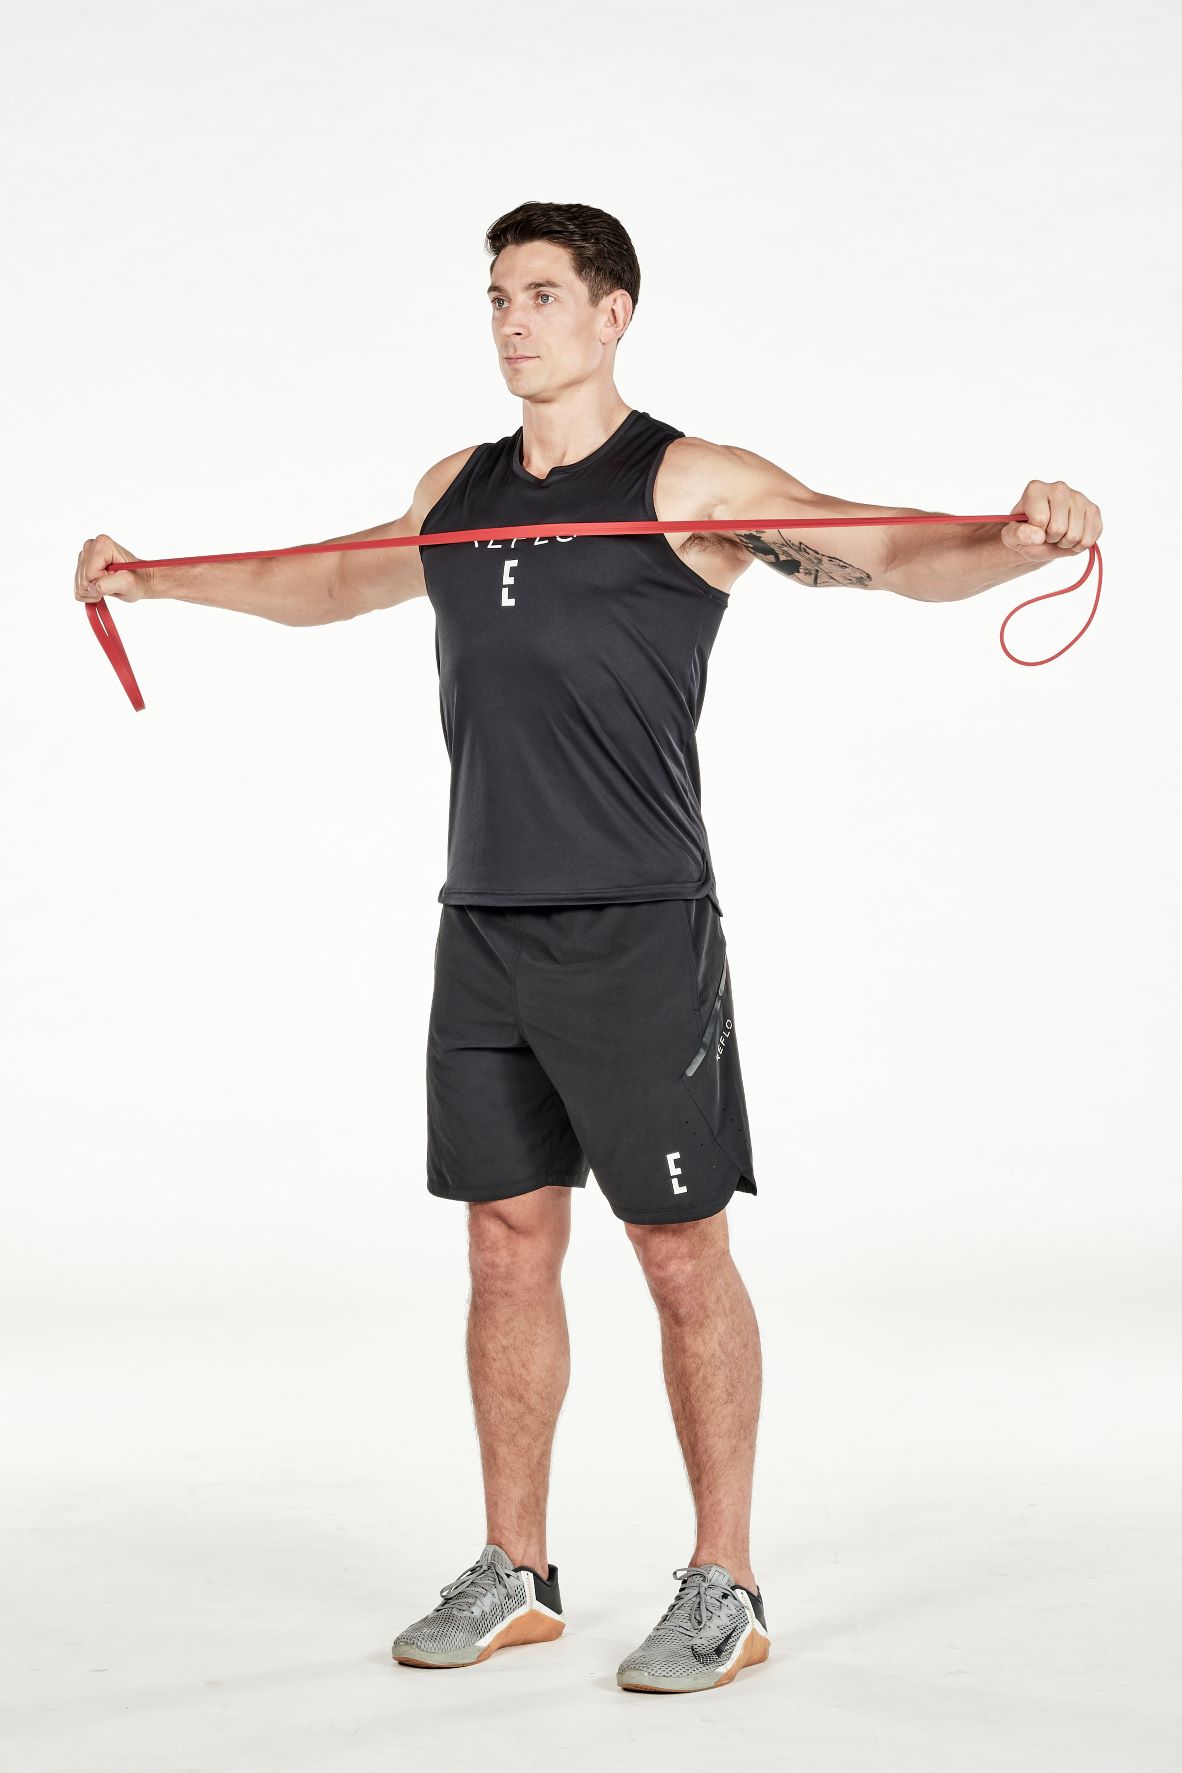 man demonstrating step two of reverse fly; standing up straight, he holds a resistance band in both hands, he stretches his arms outwards as far as possible; he wears a black fitness vest, black shorts and trainers